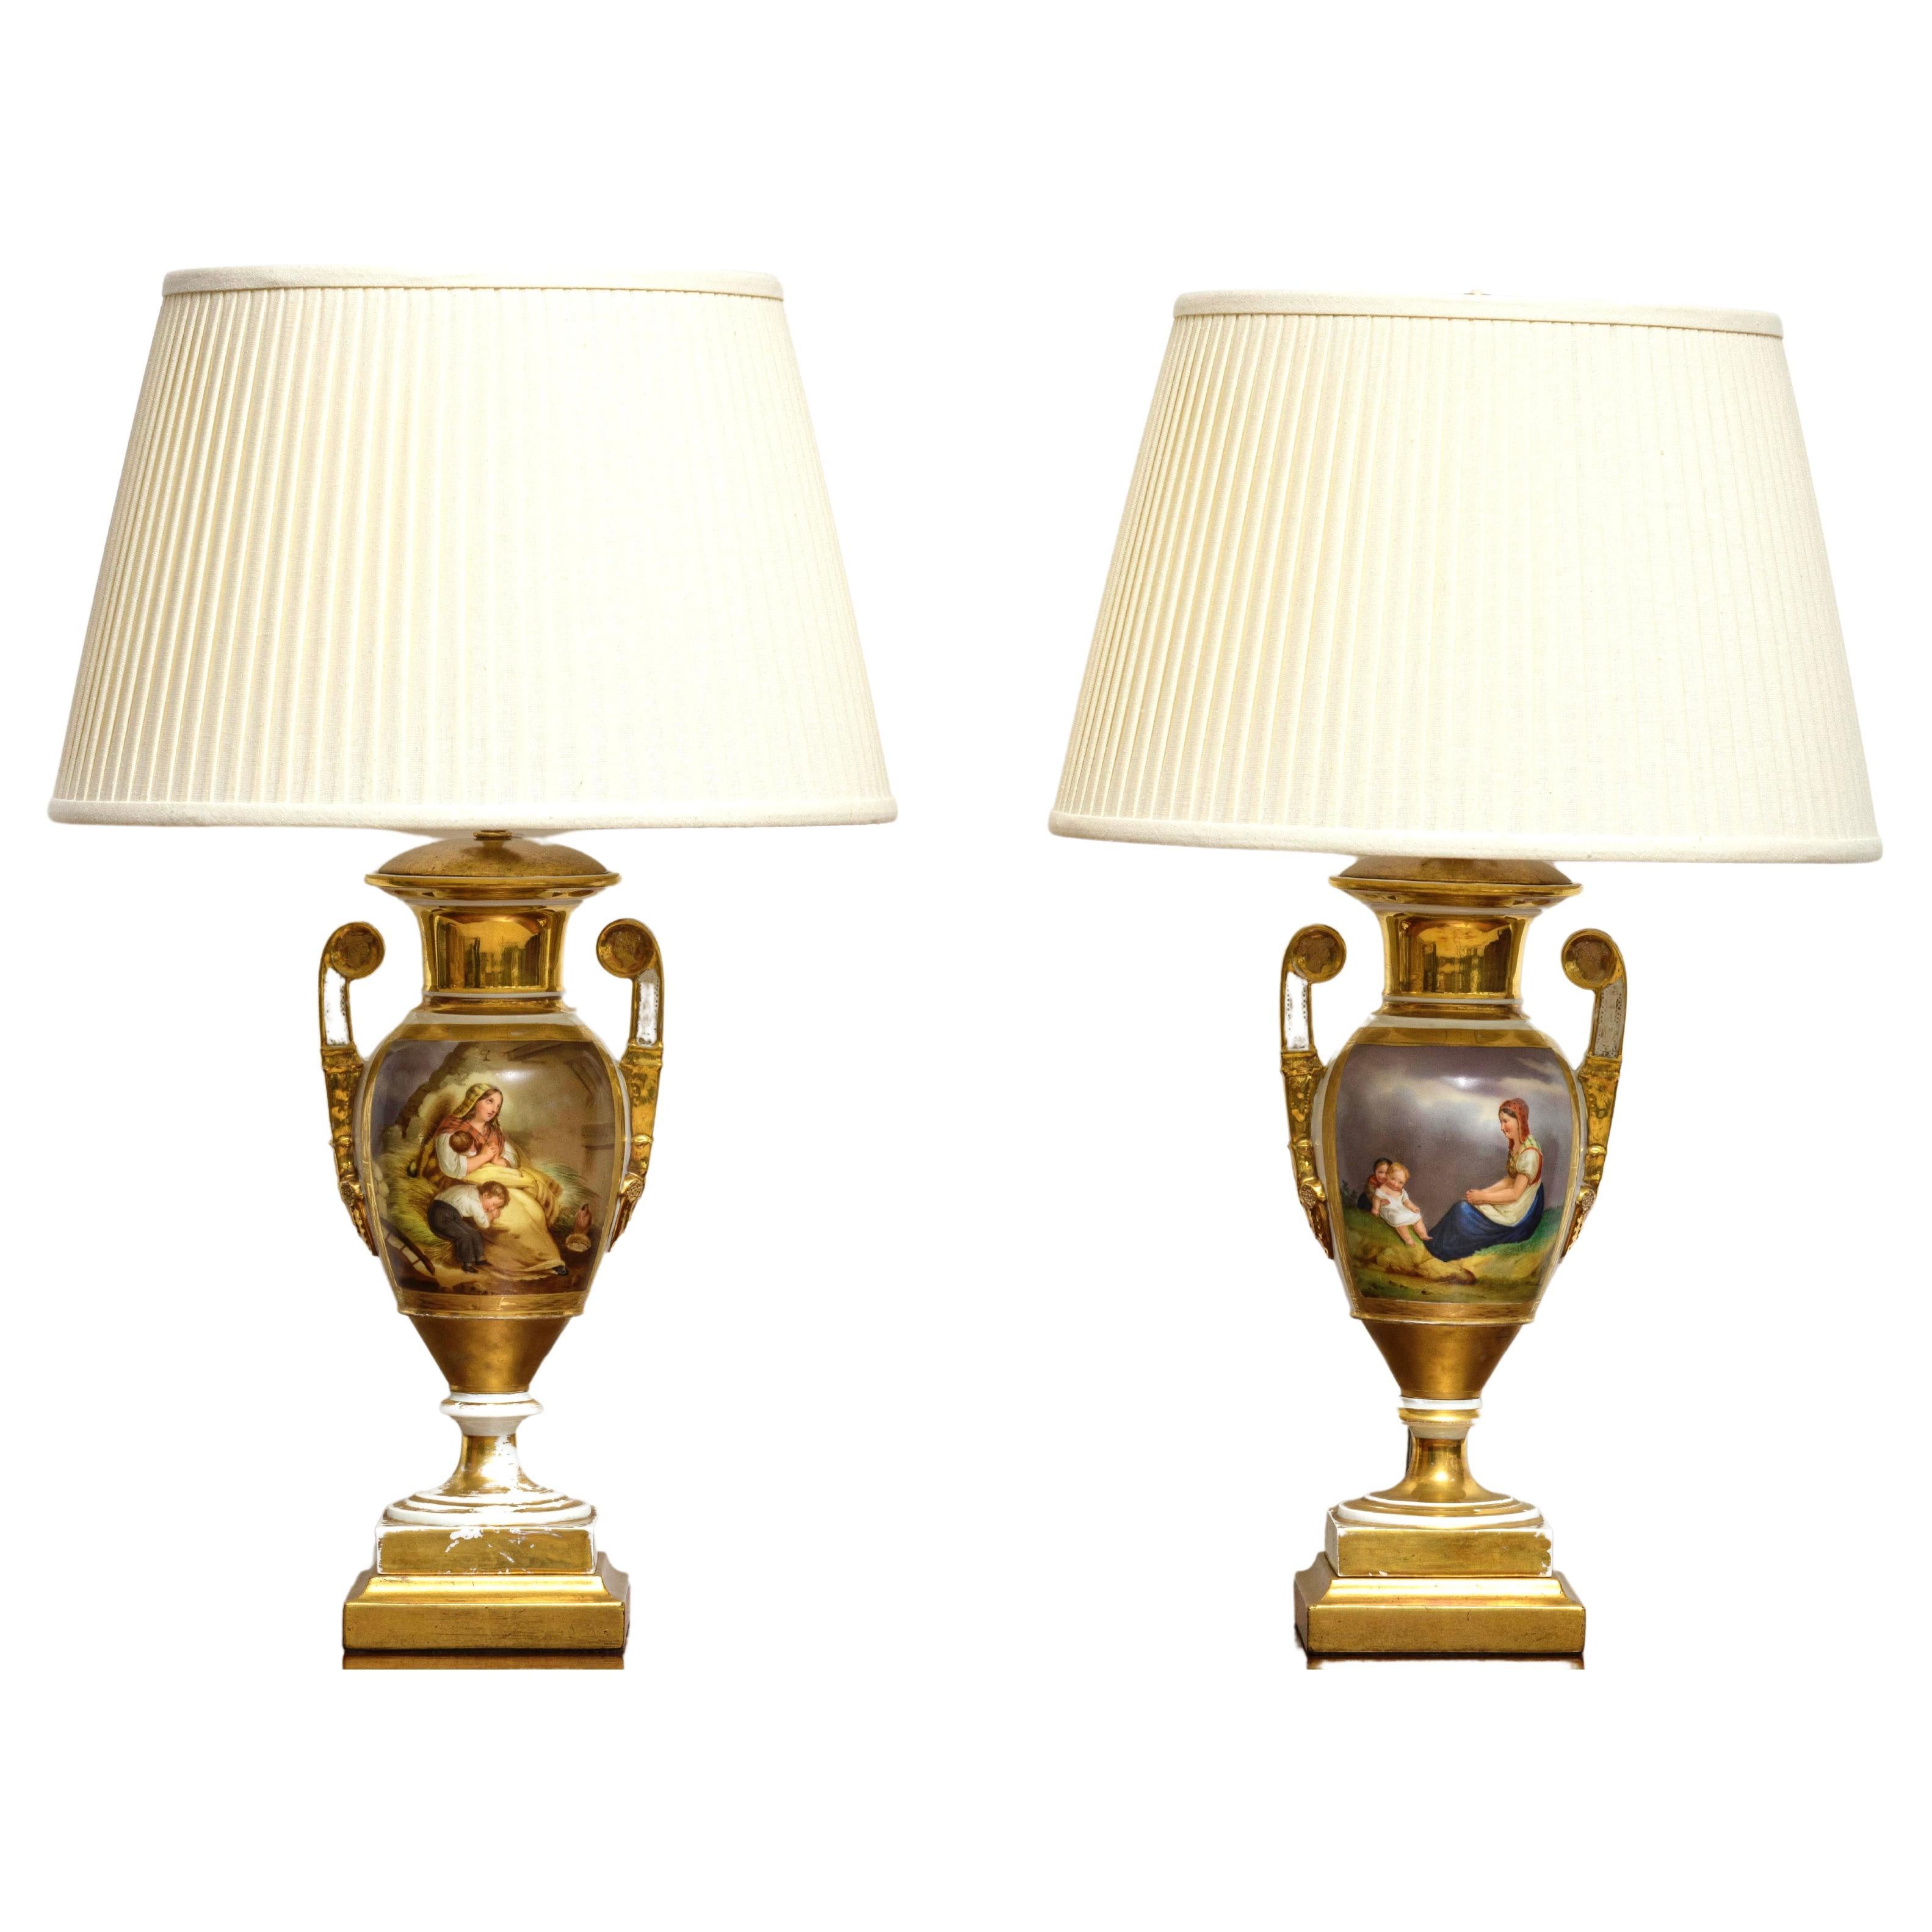 Paris Porcelain urns, wired as lamps For Sale